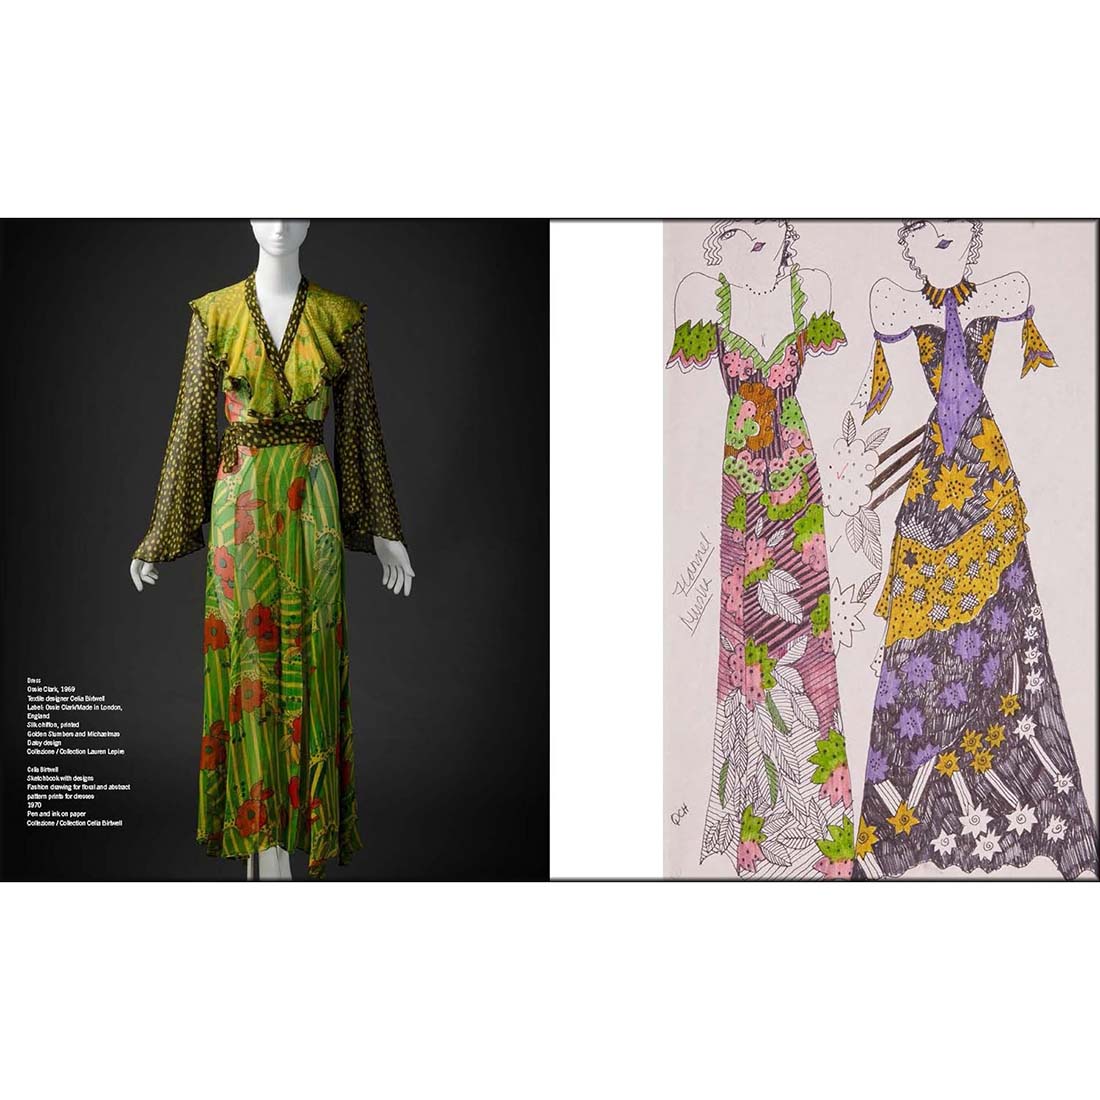 Mr. &amp; Mrs. Clark: Ossie Clark and Celia Birtwell: Fashion and Prints